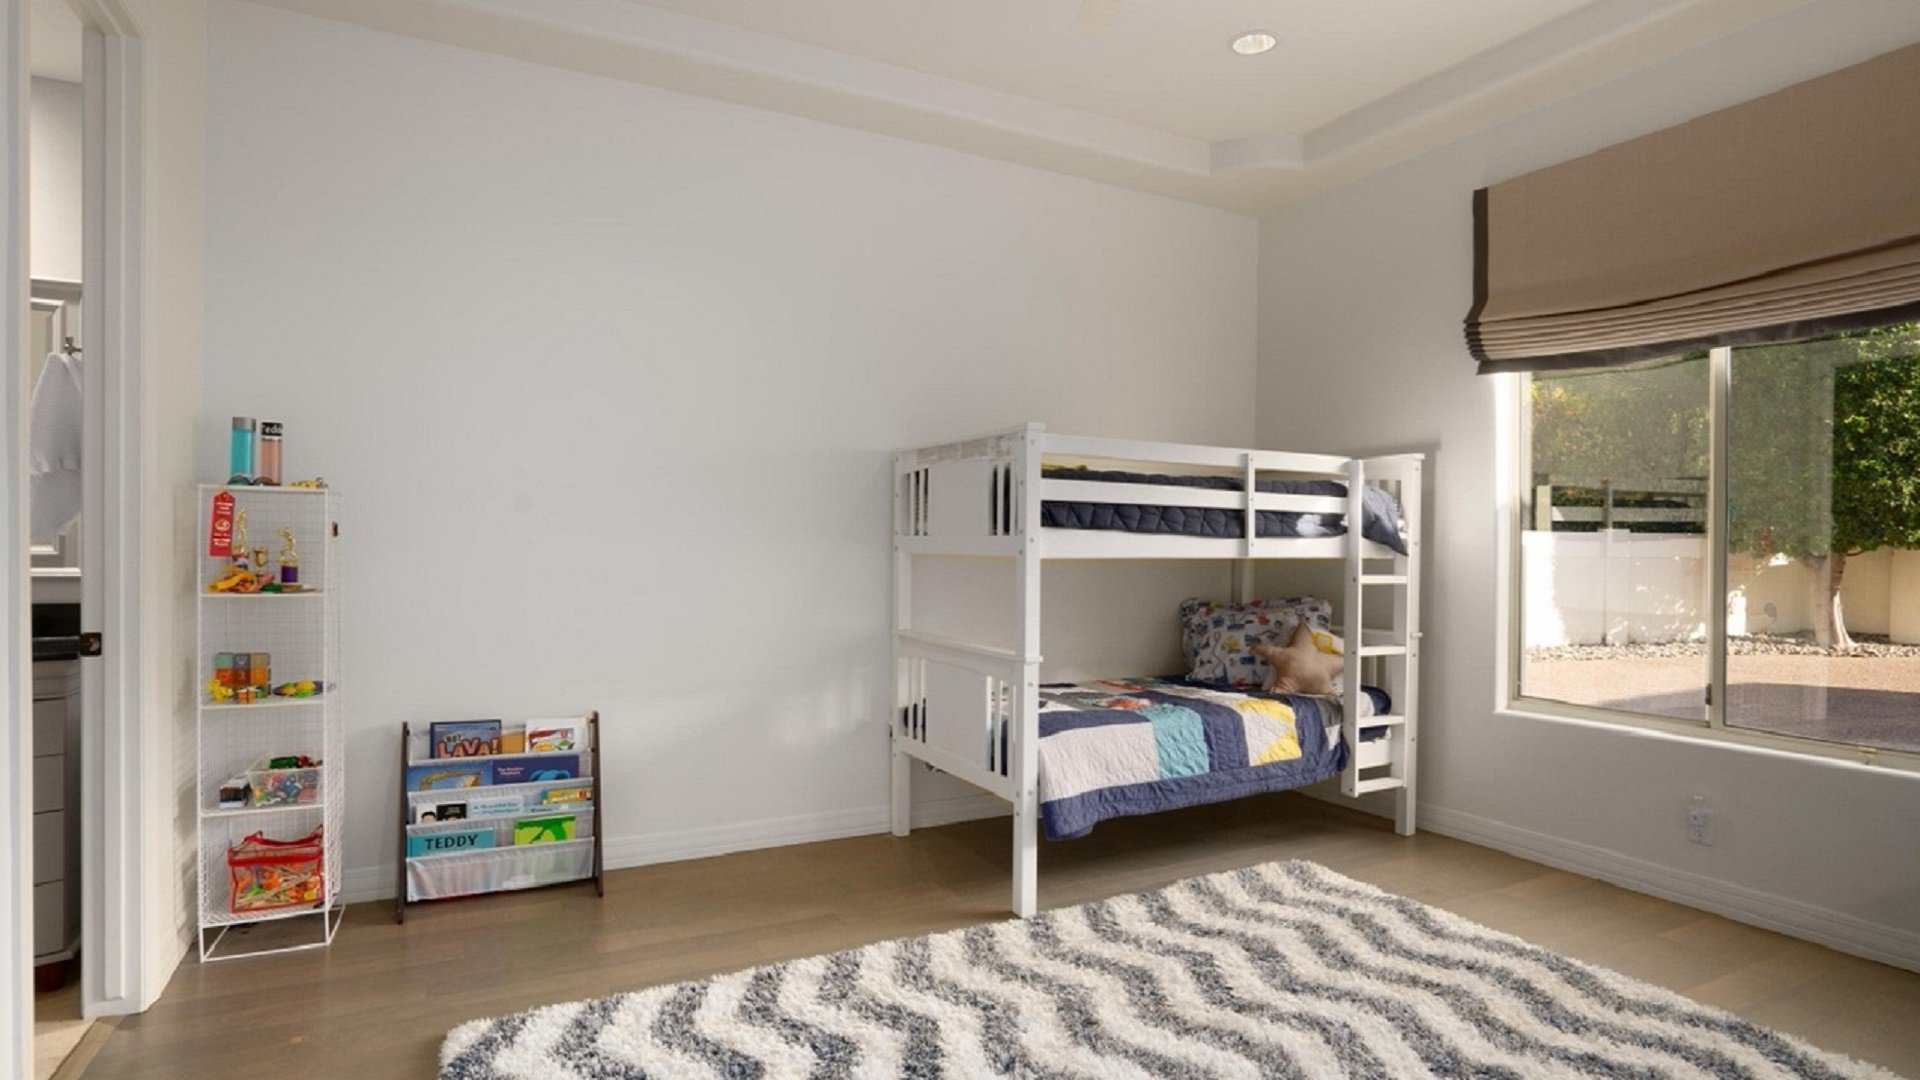 This bedroom will be set up with a queen-sized bed